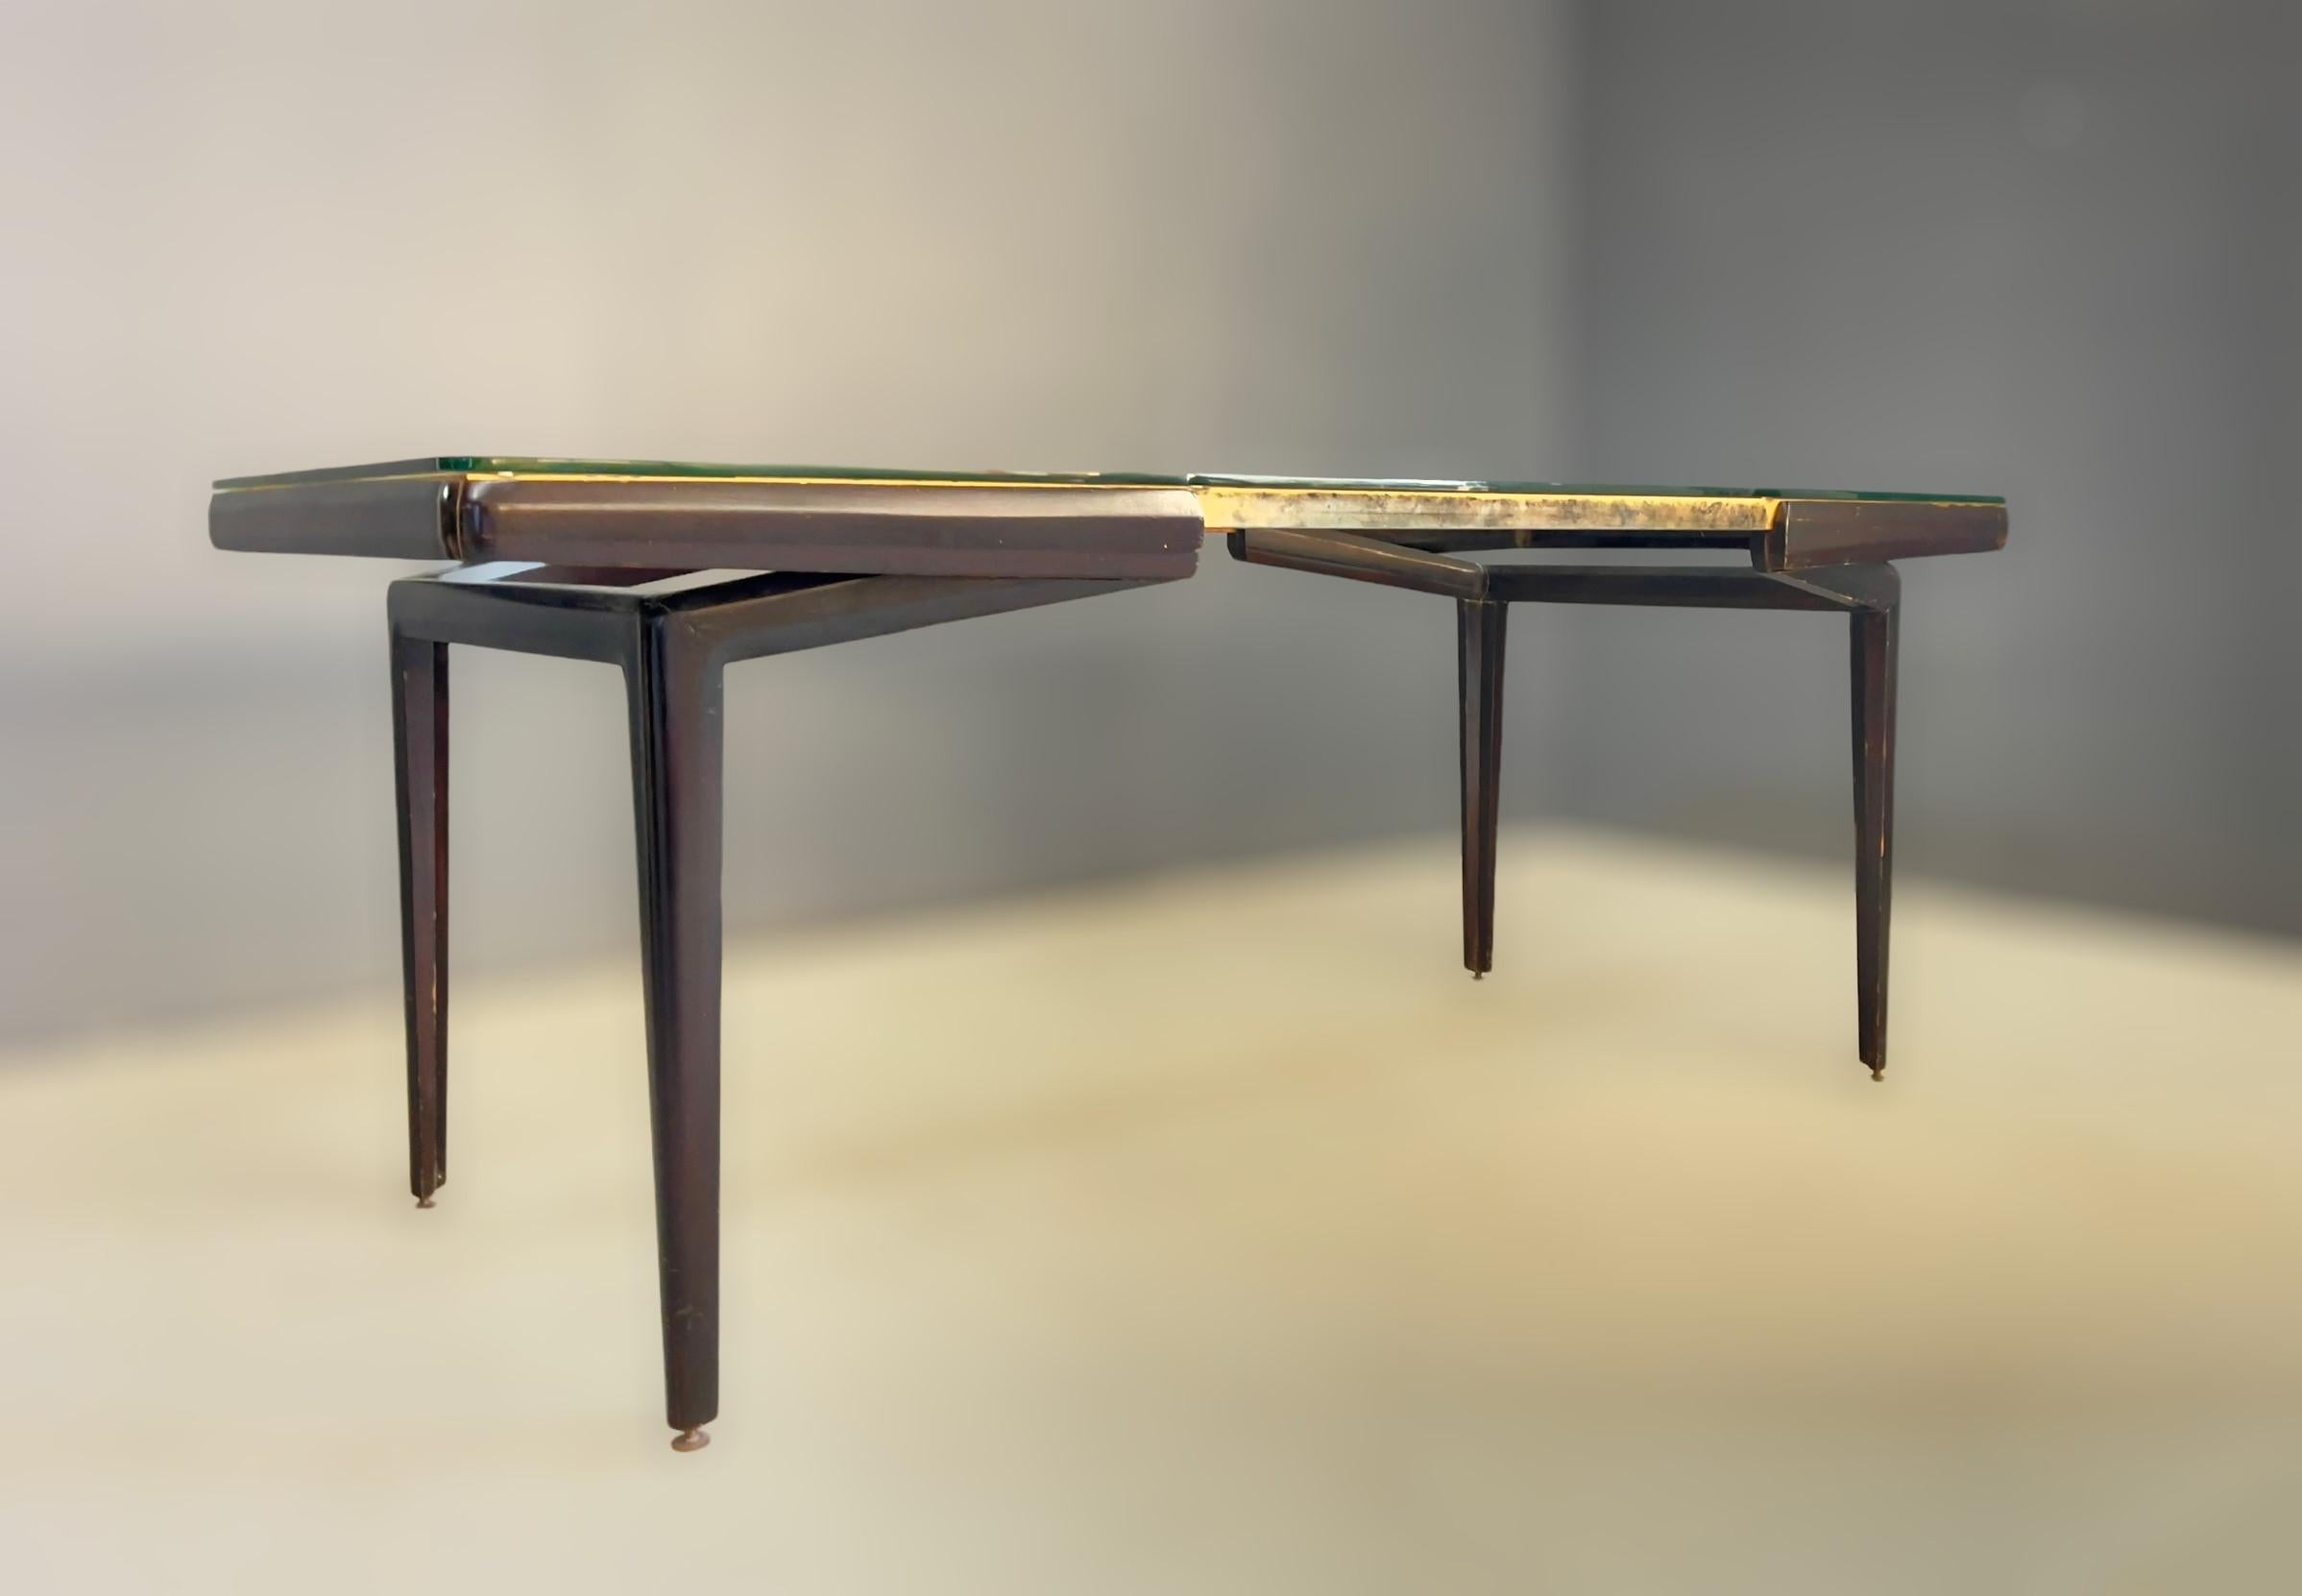 Beautiful dining table with wood and brass frame and glass top attributed to Giovanni Ferrabini. Italian manufacture. 1950s